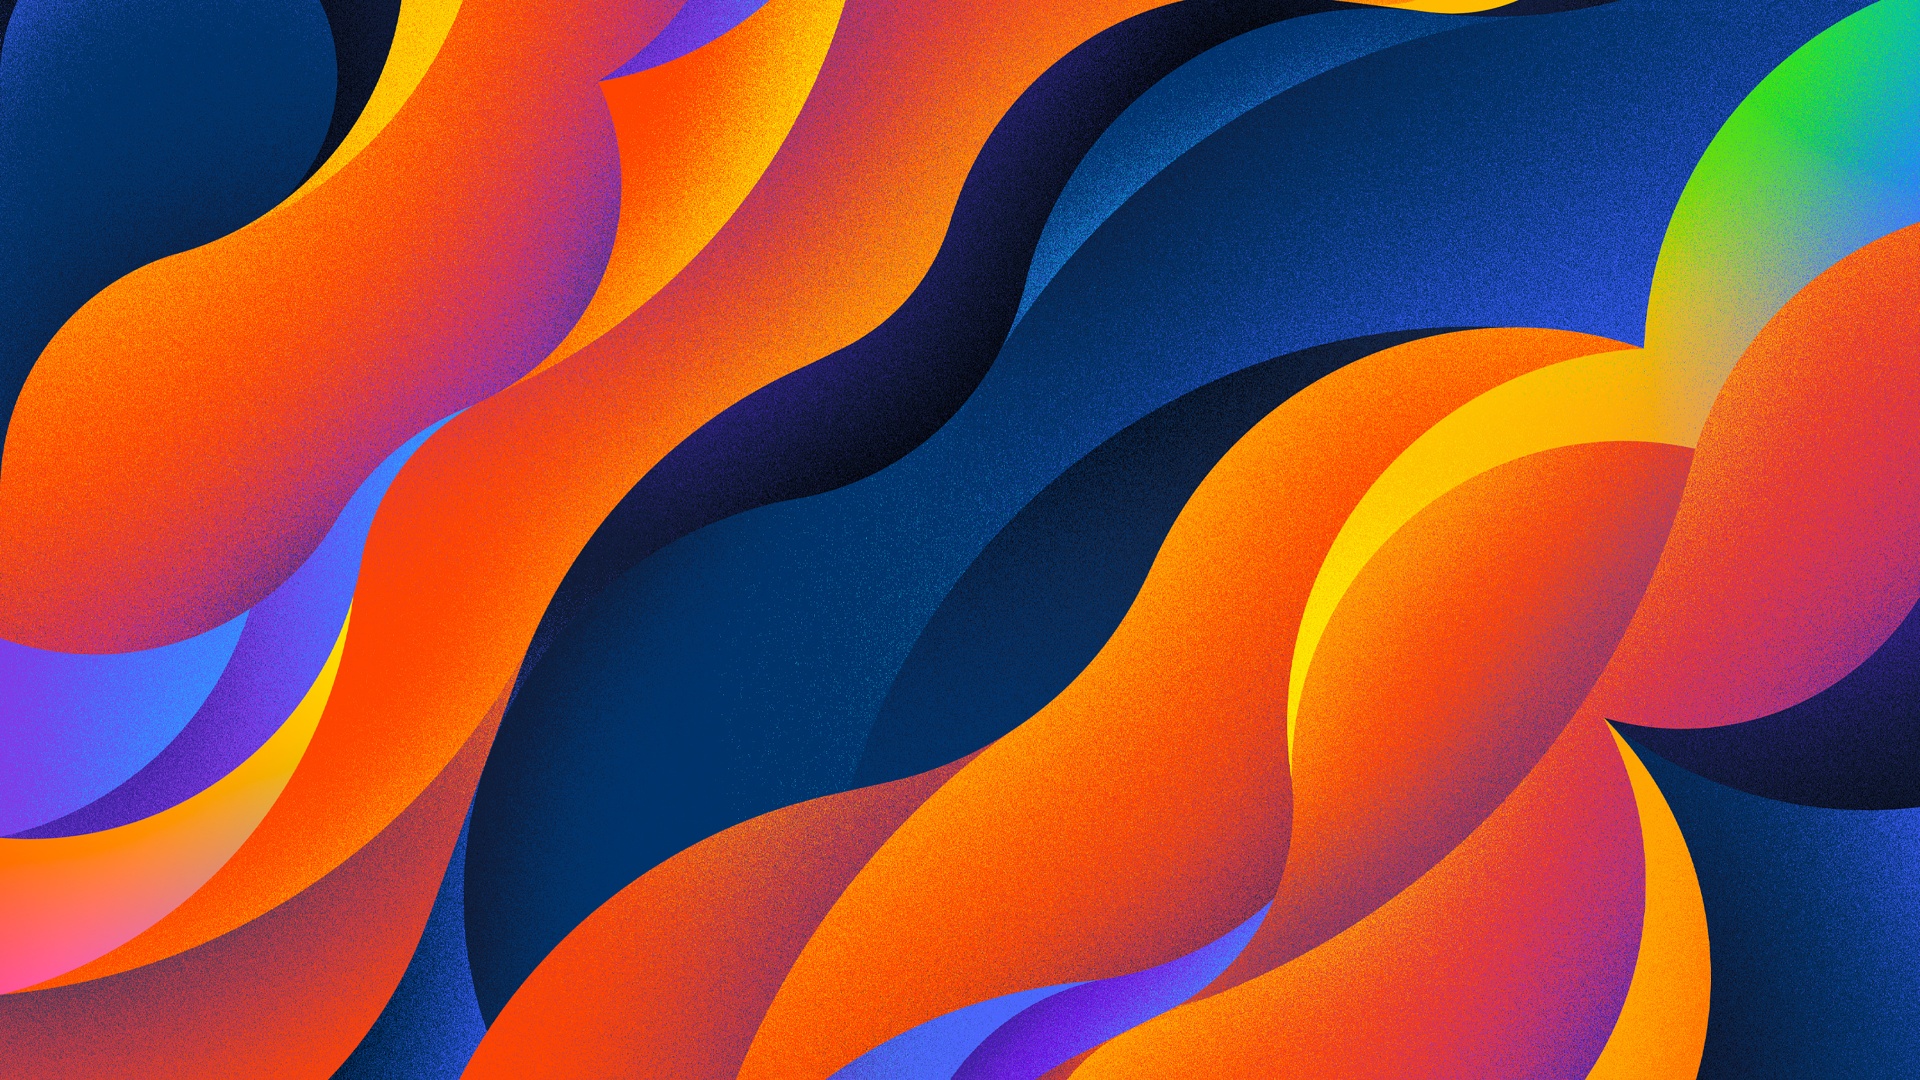 1700+] Abstract Wallpapers | Wallpapers.com